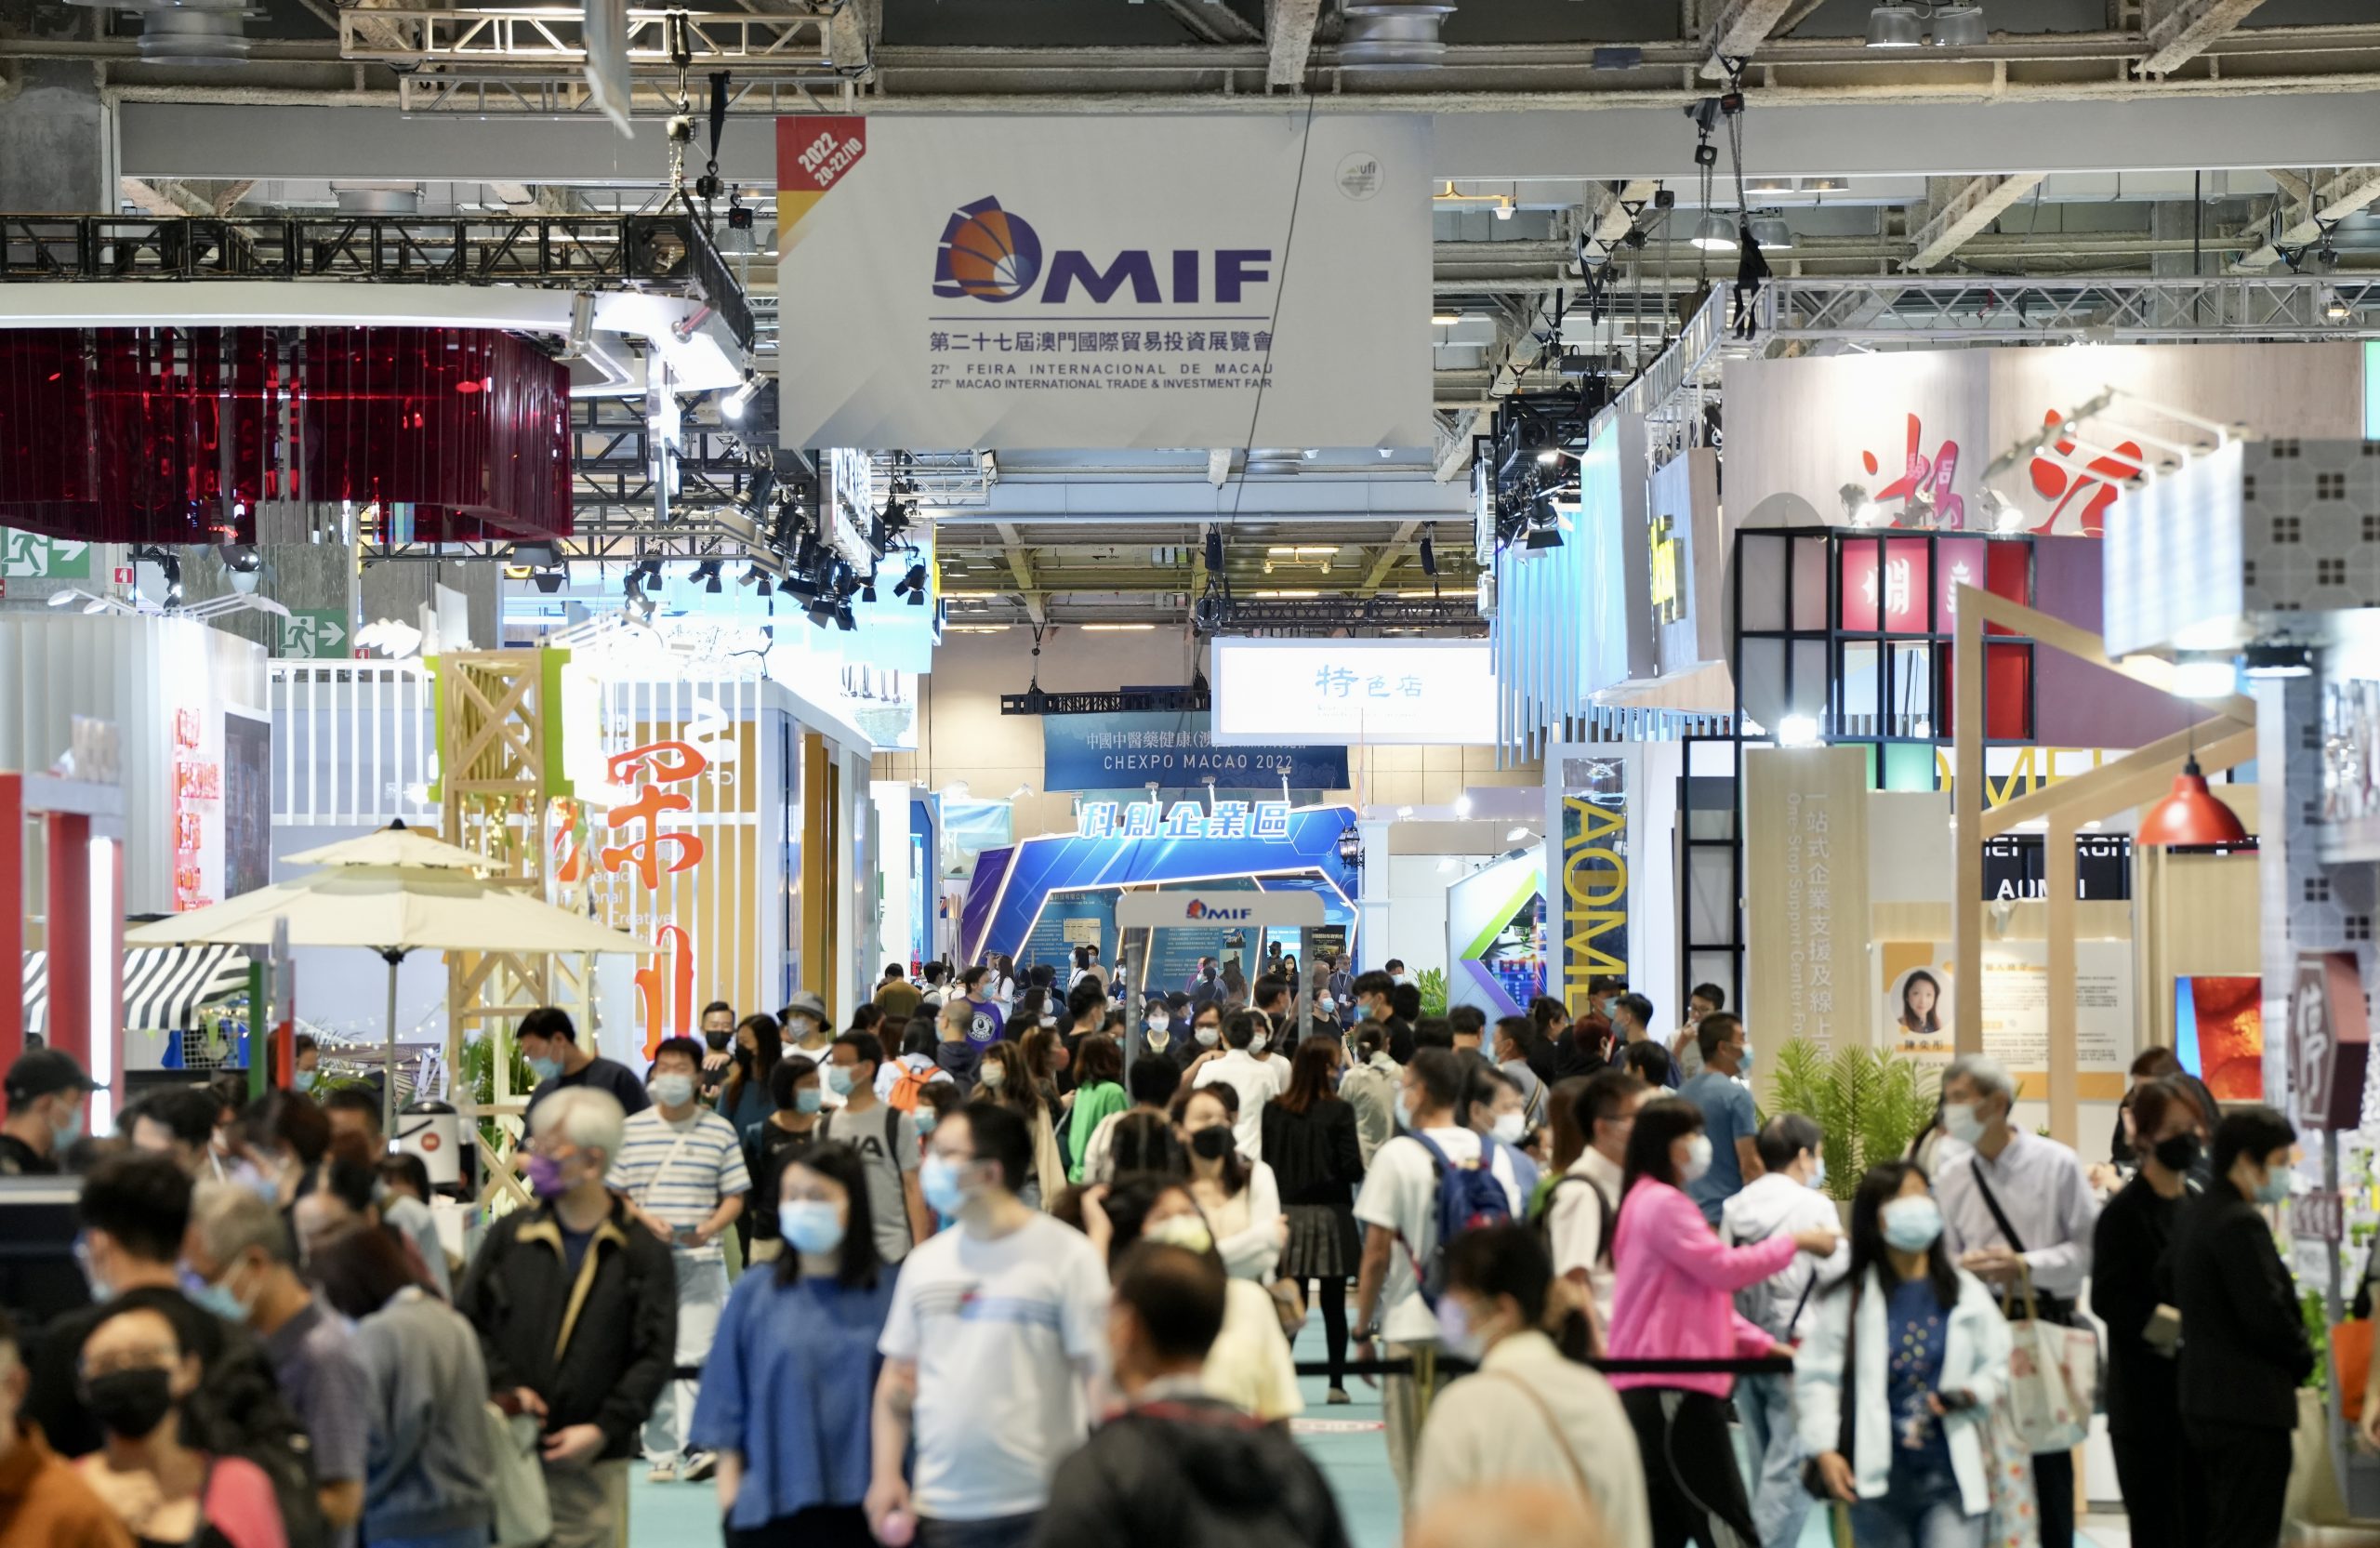 More than 14,000 delegates are expected to attend MICE events in the coming month